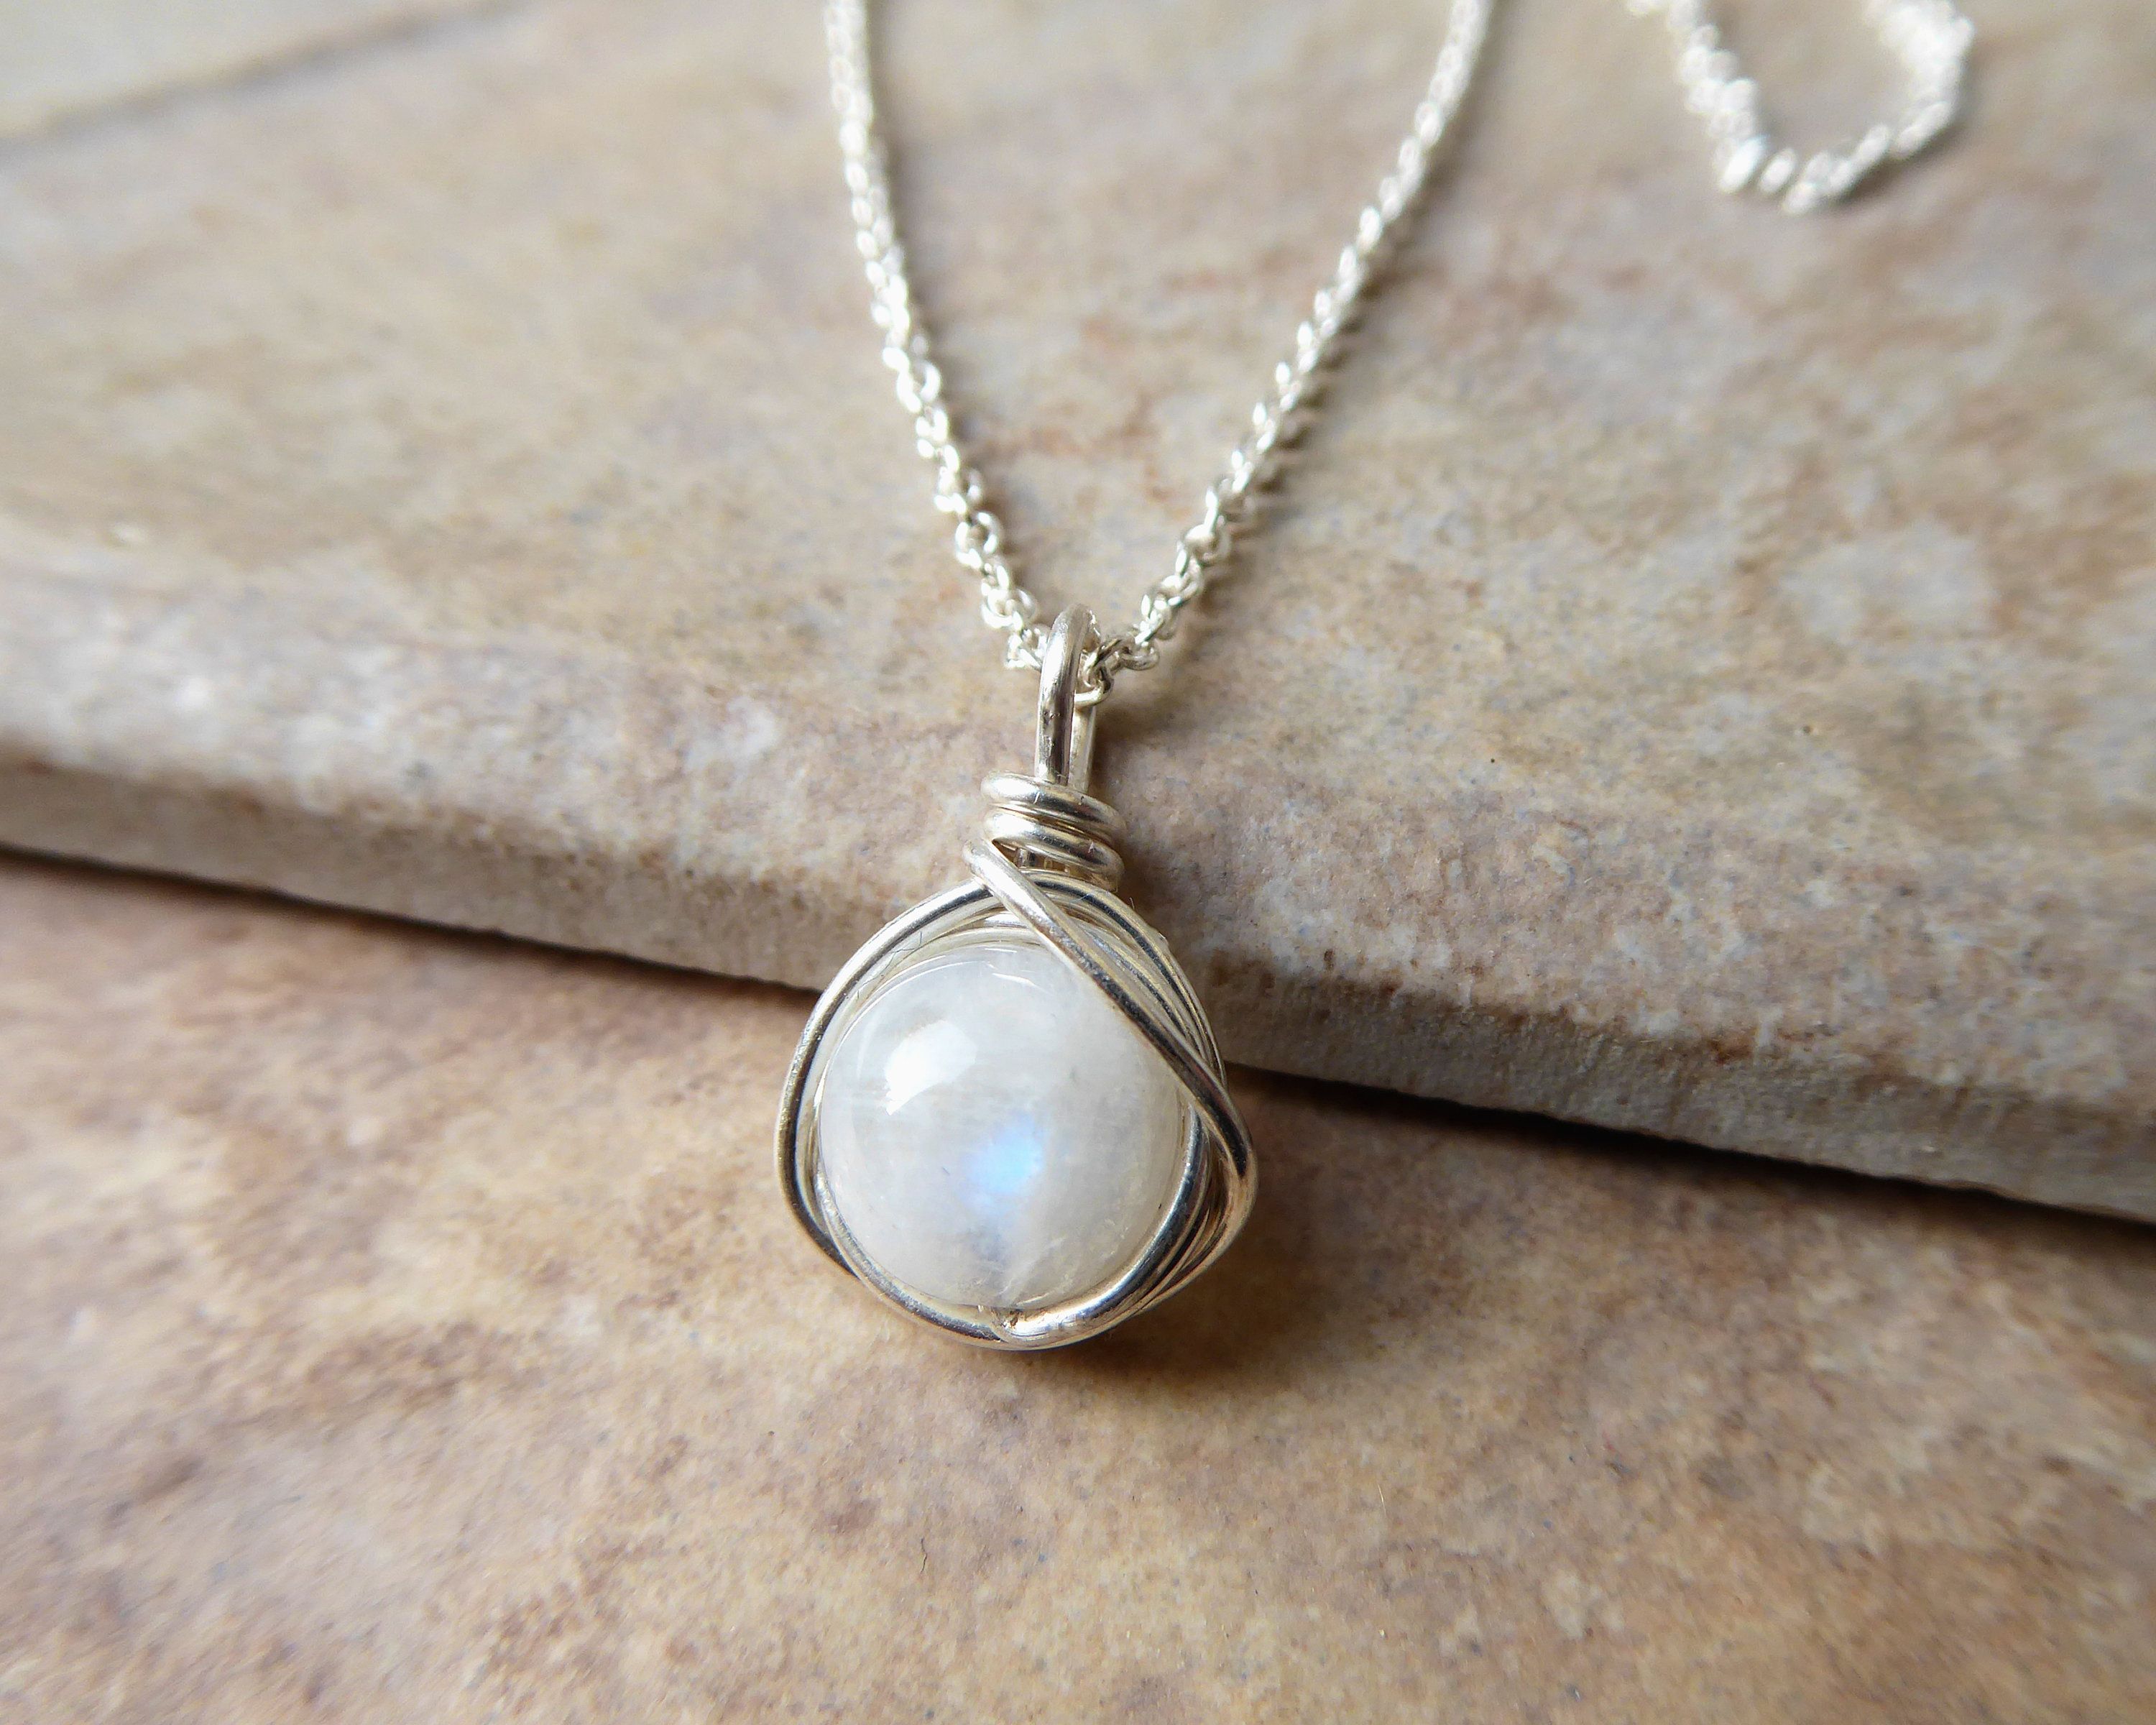 Moonstone Necklace, Rainbow Moonstone Pendant Necklace, Moonstone  Jewellery, June Birthstone, Bridesmaids Gifts, Birthday Gift, Wife Gift Regarding Most Recent Grey Moonstone June Droplet Pendant Necklaces (View 6 of 25)